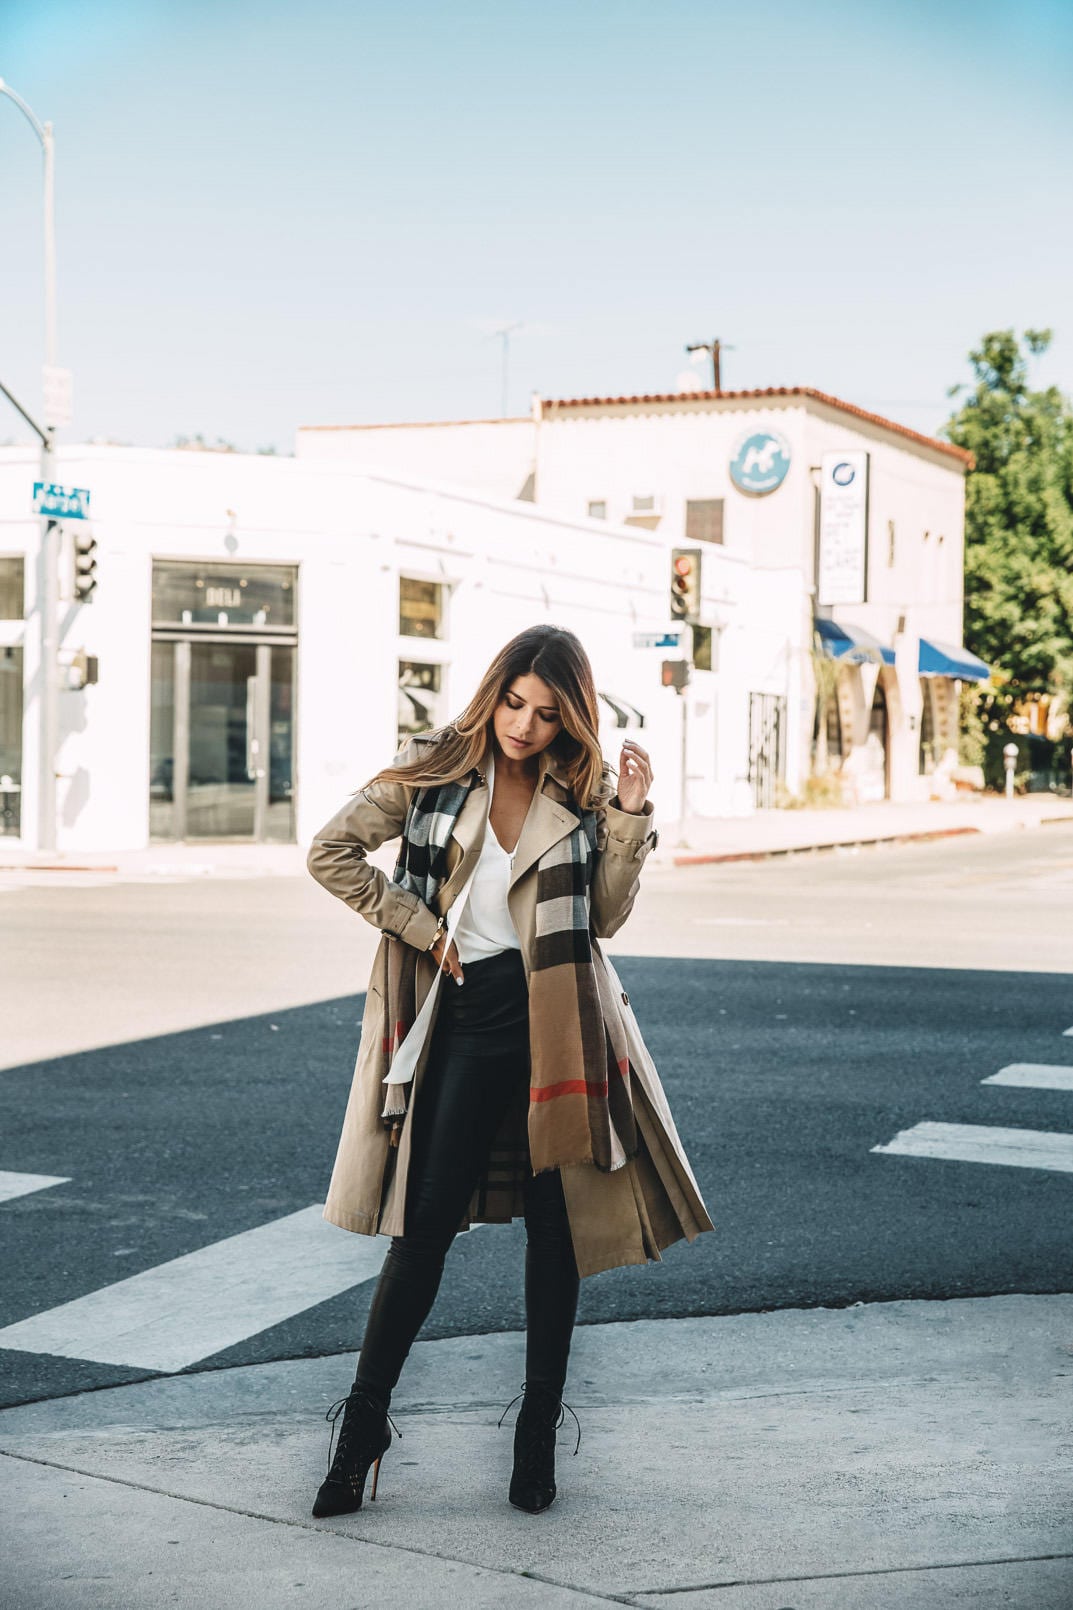 Your Top 3 Outerwear Staples for Fall - The Girl from Panama